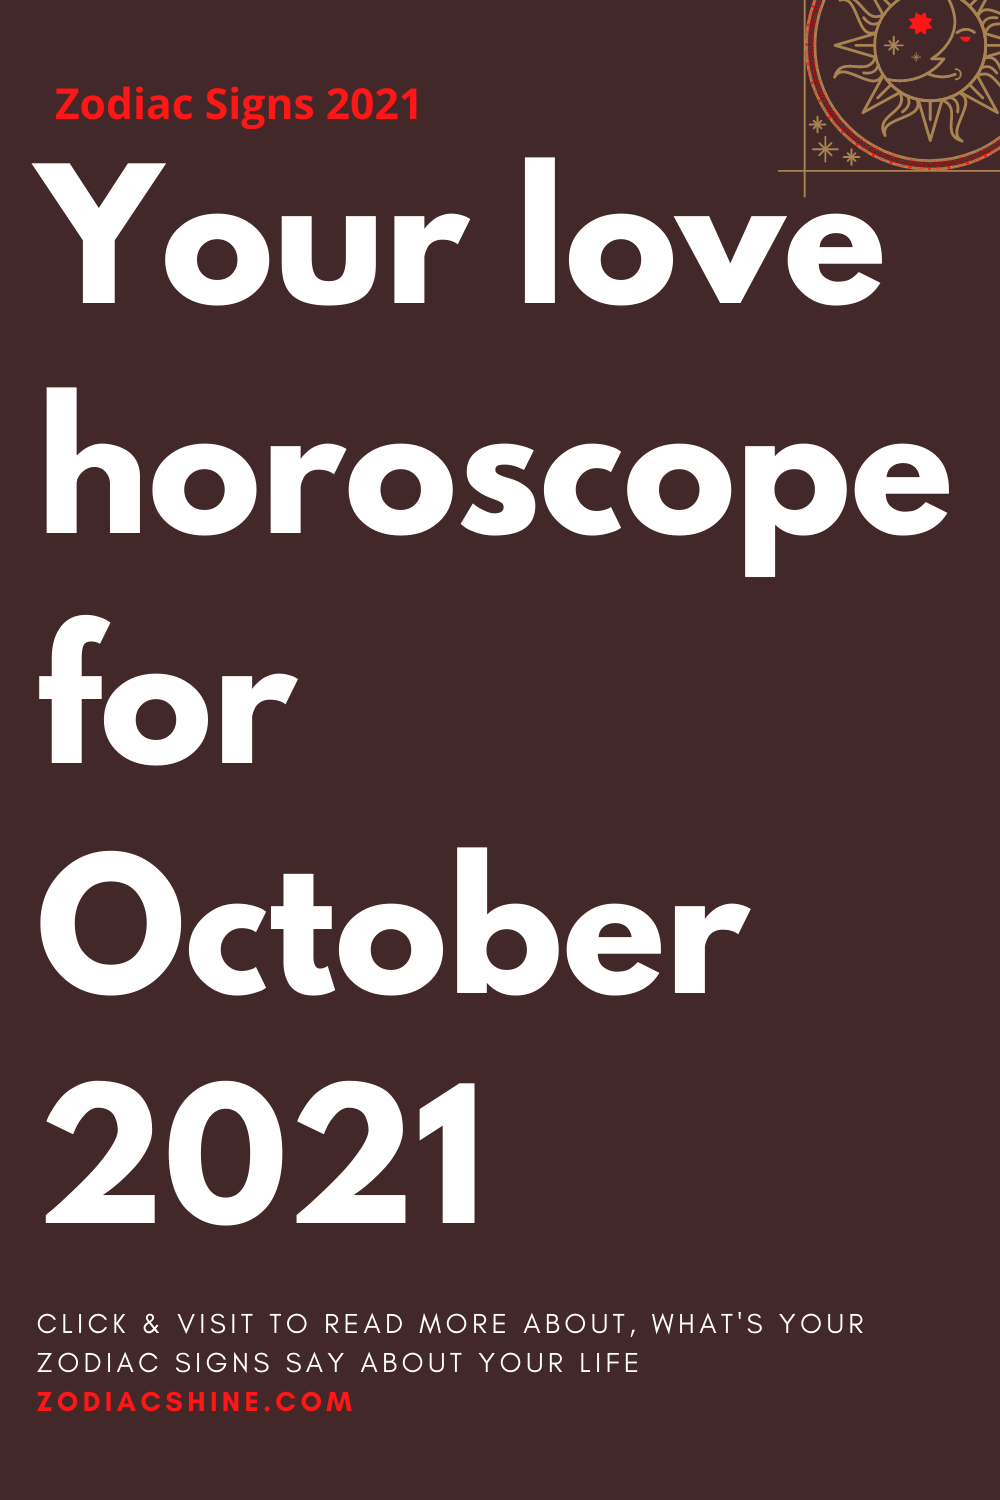 Your love horoscope for October 2021